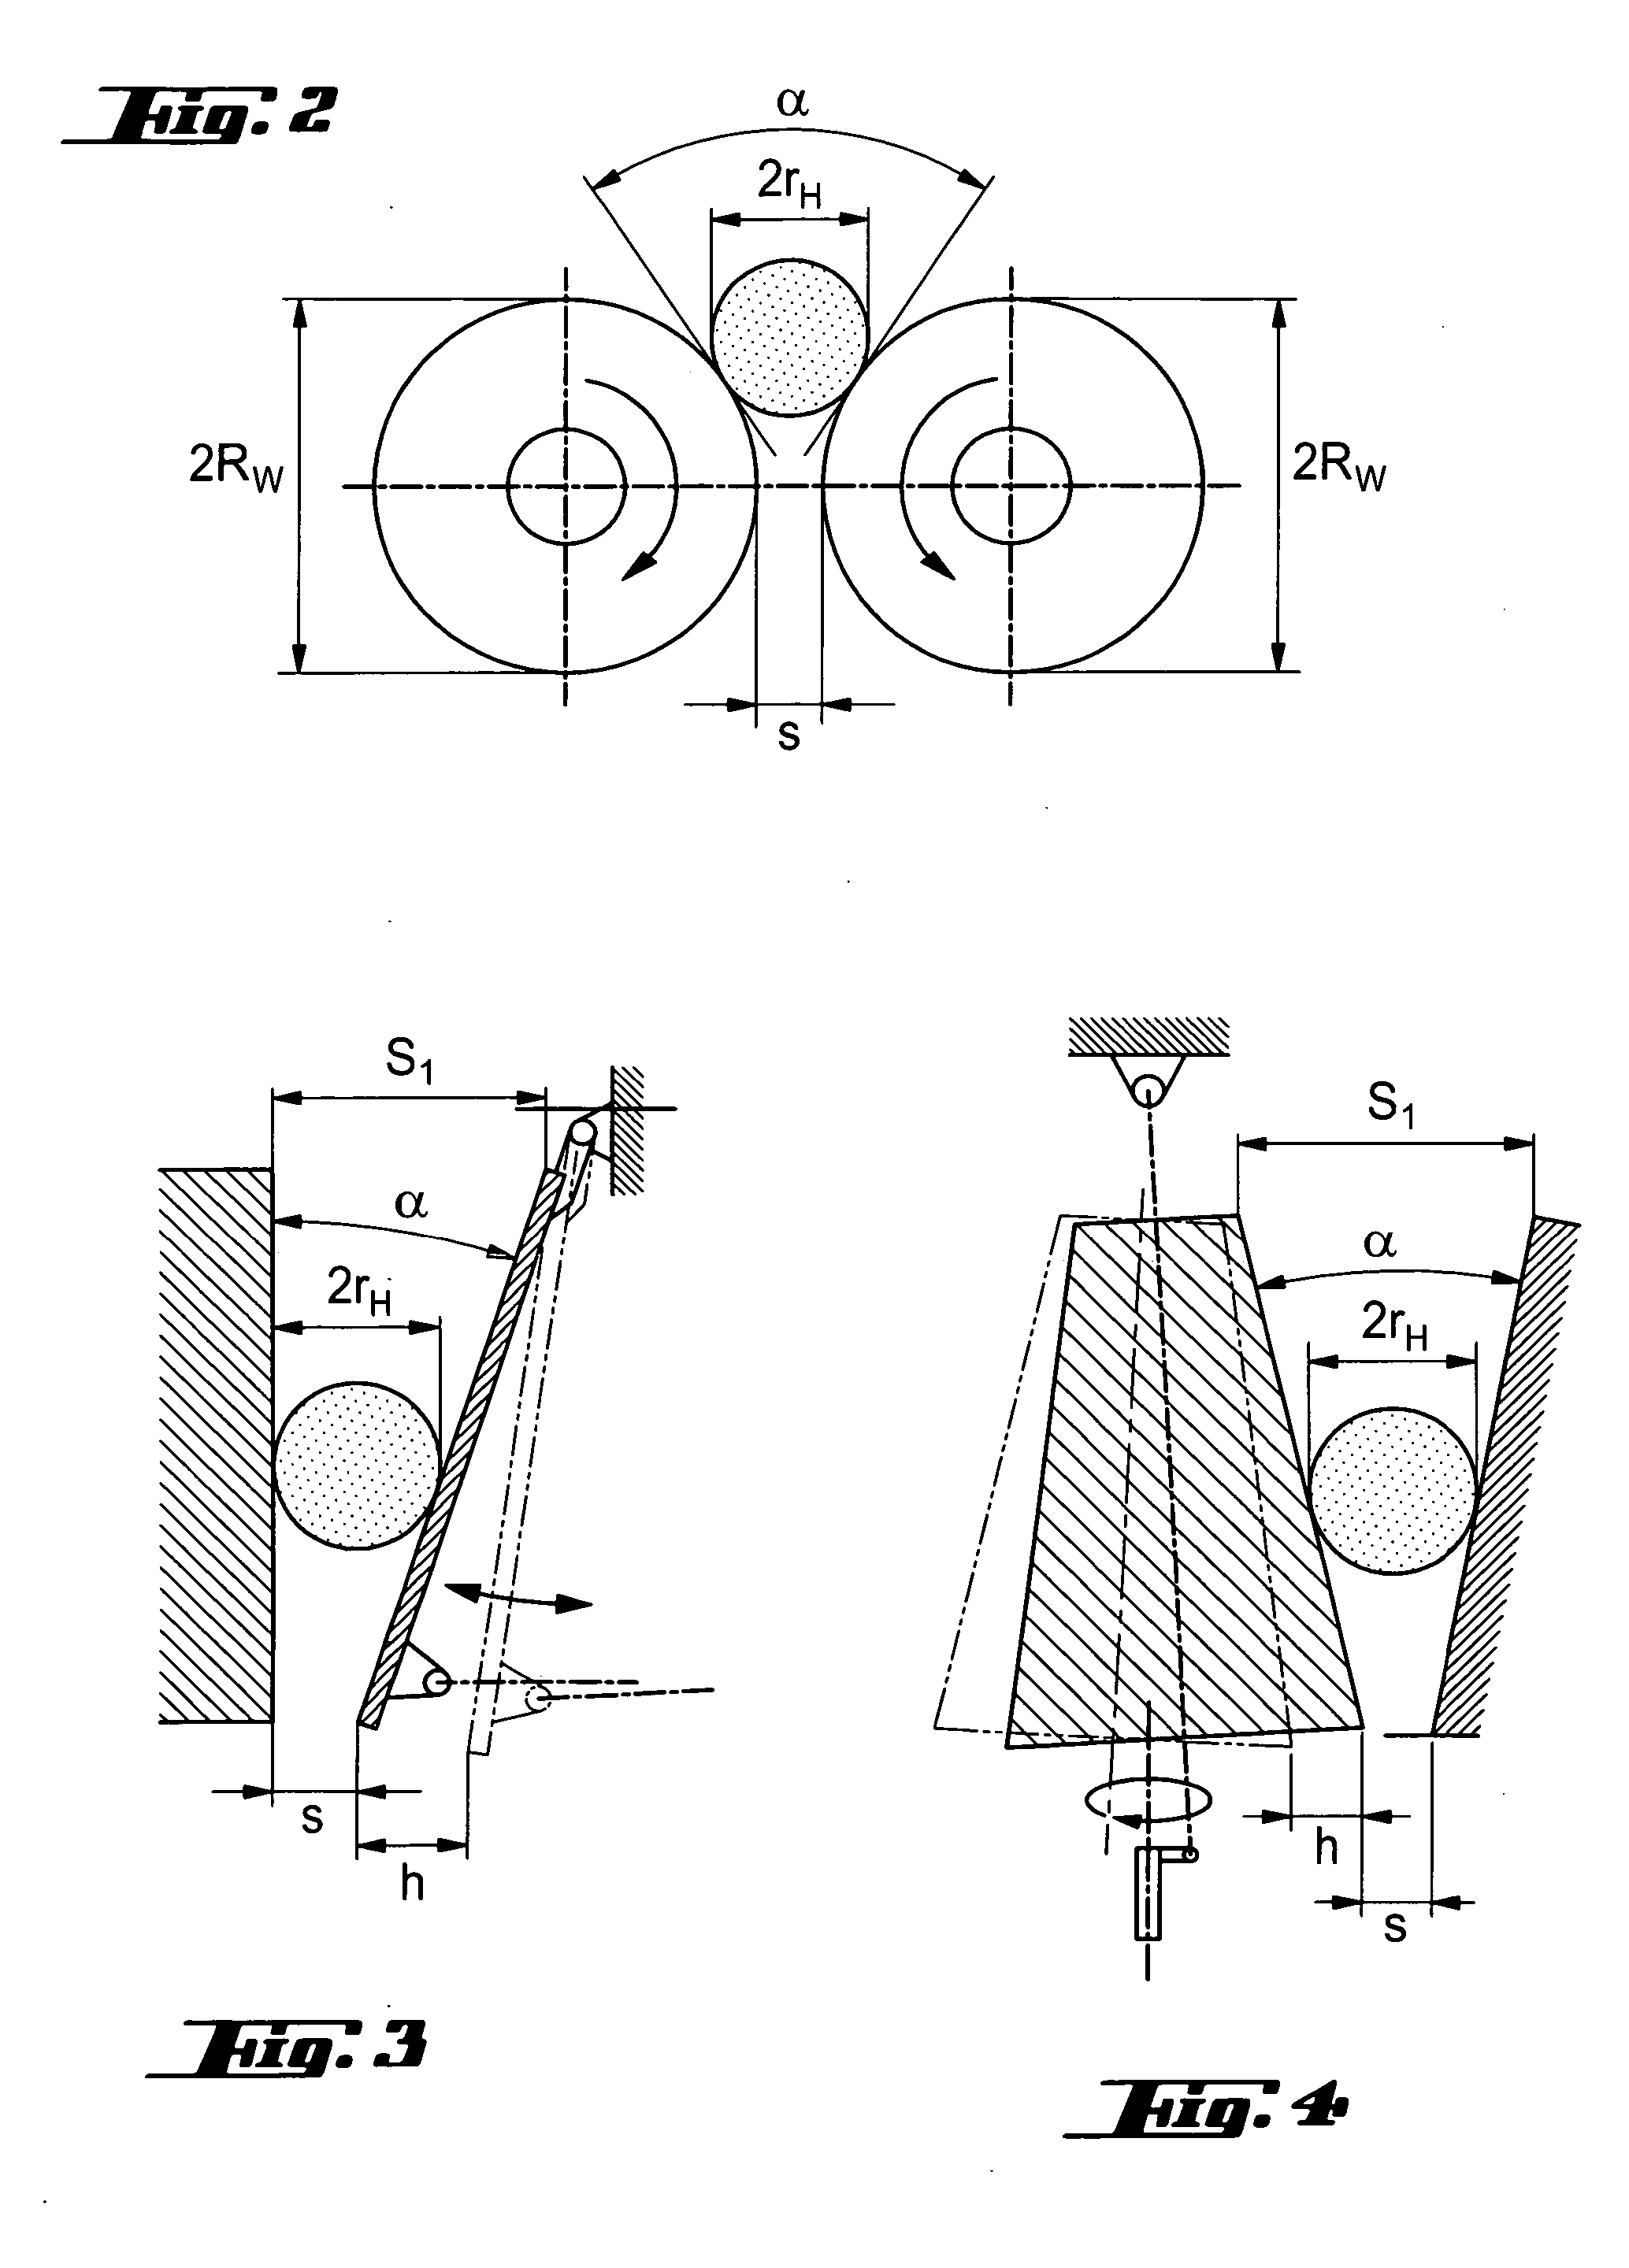 Apparatus and method for the low-contamination, automatic crushing of silicon fragments